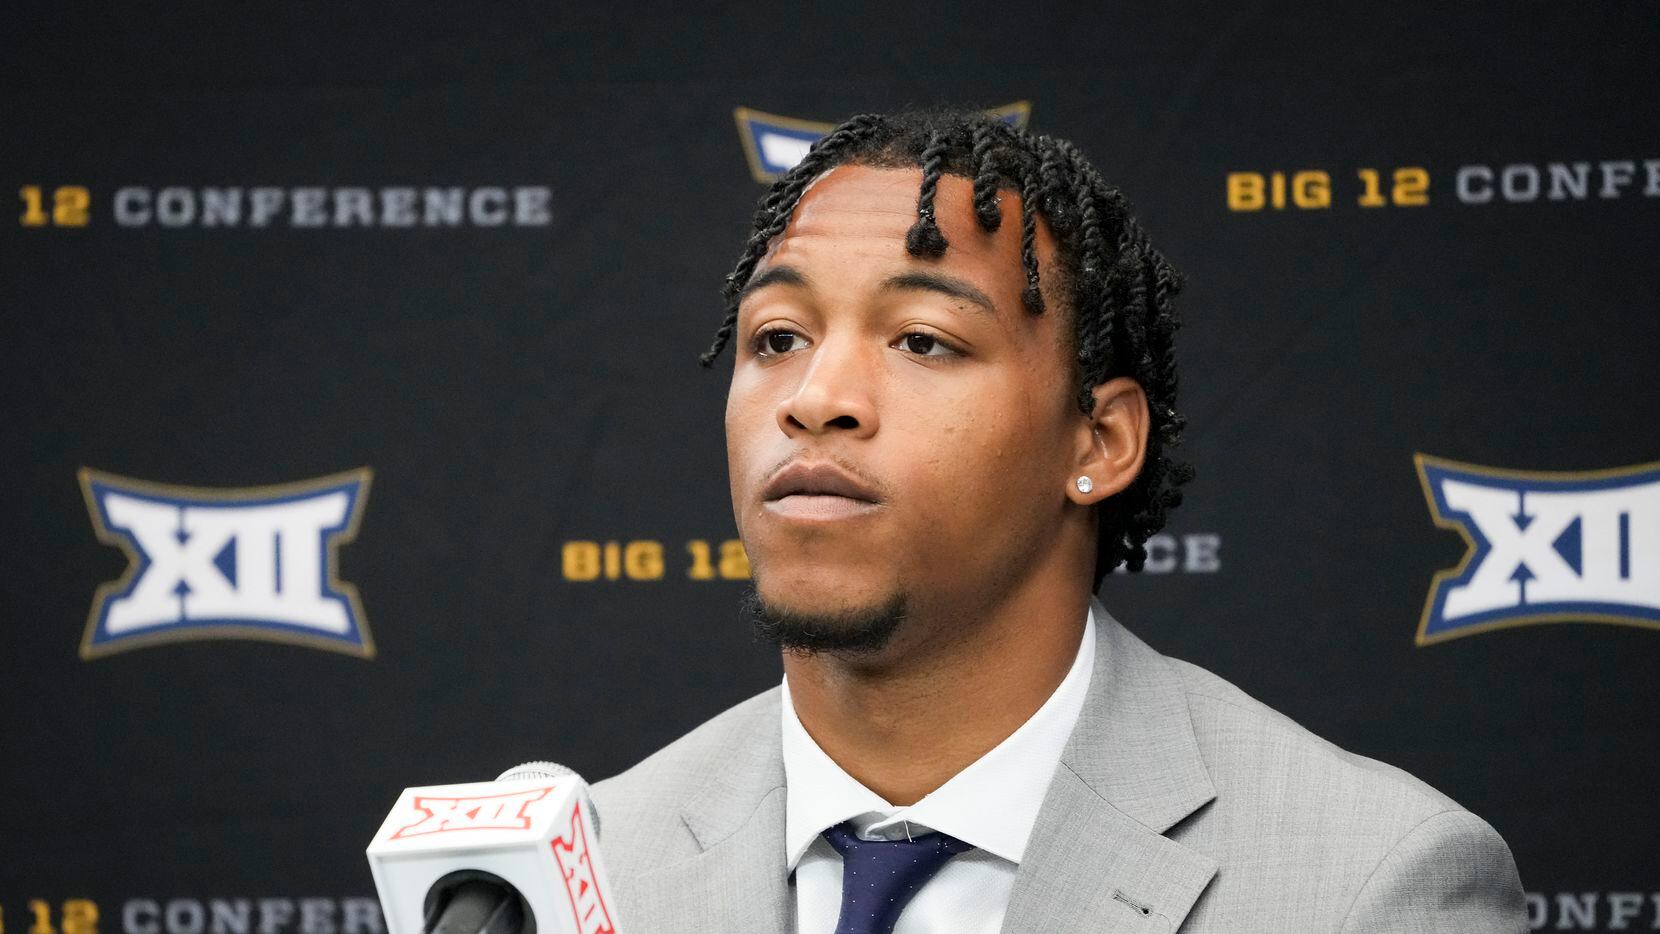 West Virginia defensive back Charles Woods speaks to reporters during the Big 12 Conference...